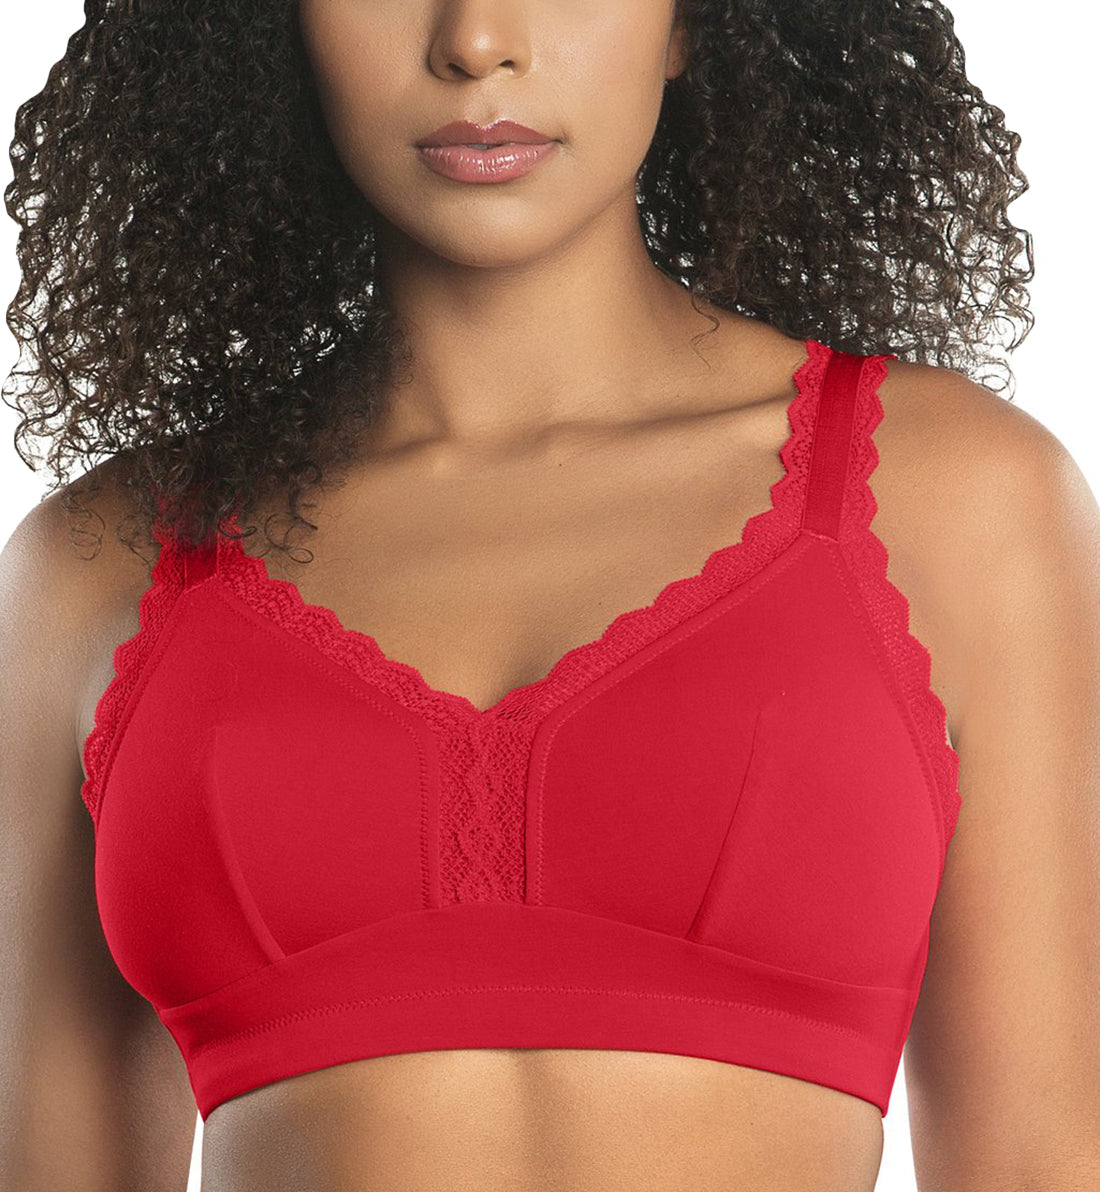 Parfait Dalis Soft Modal Bralette with J-Hook (5641)- Racing Red